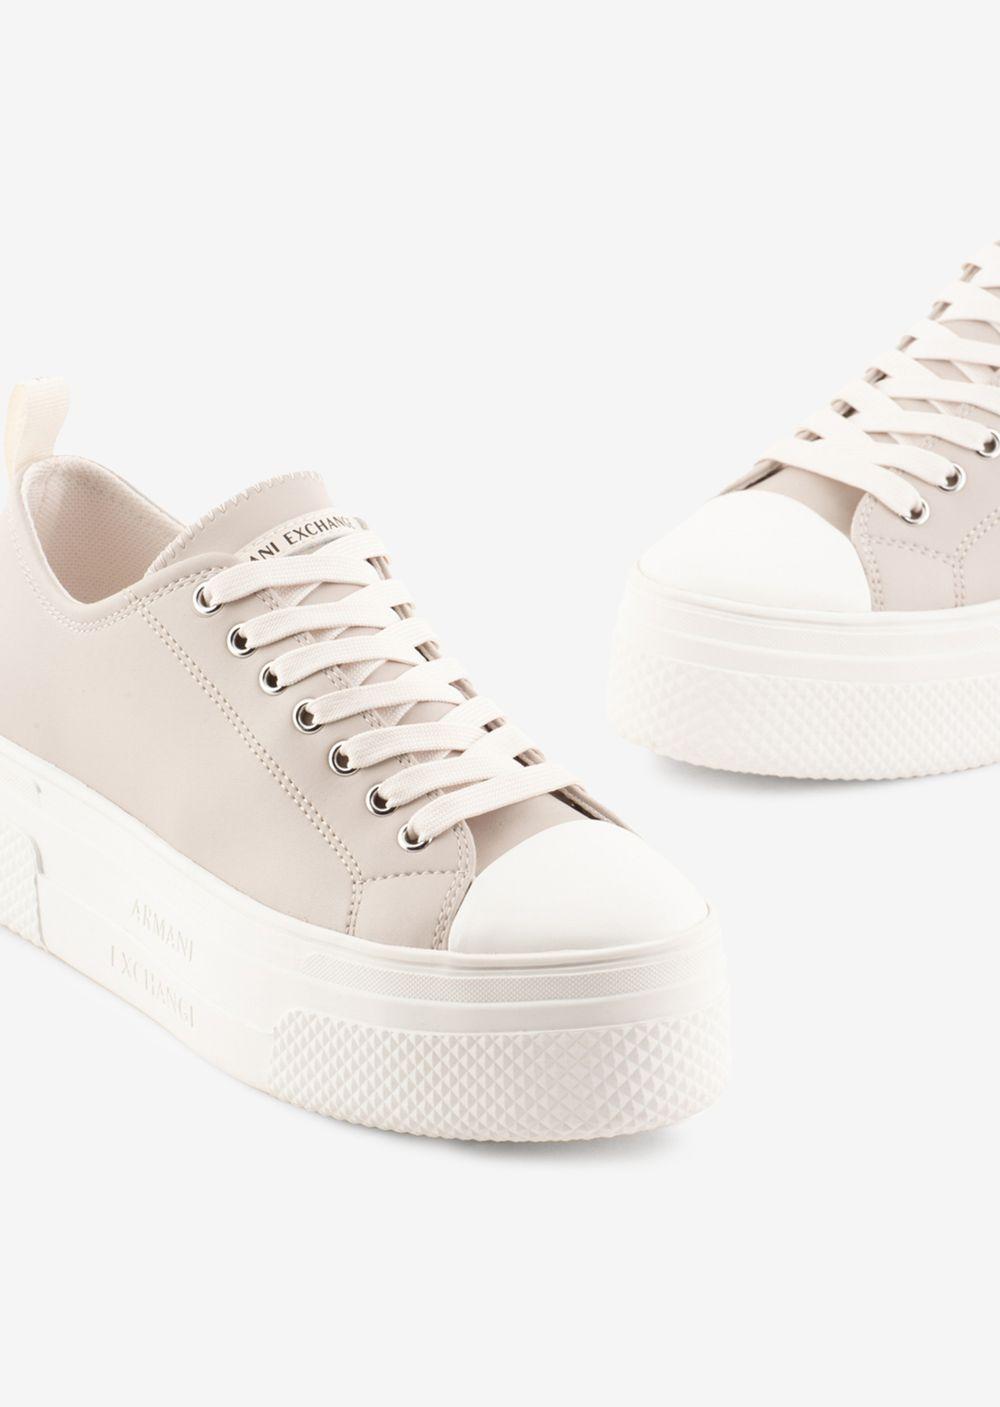 Armani Exchange Action Leather Platform Sneakers in White | Lyst